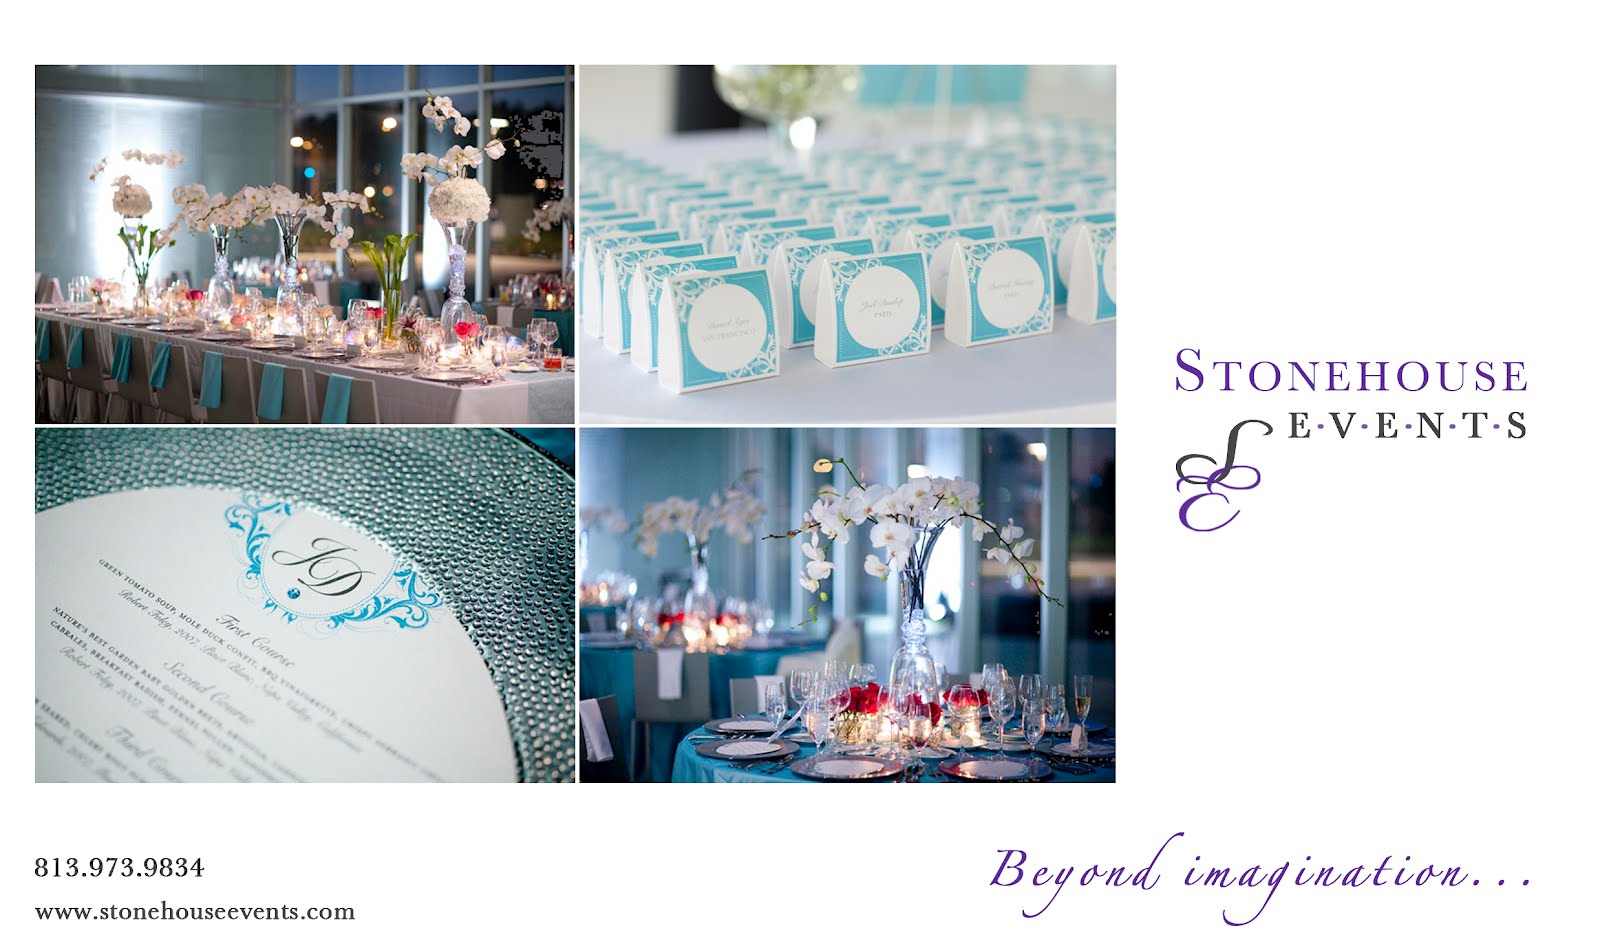 Stonehouse Events